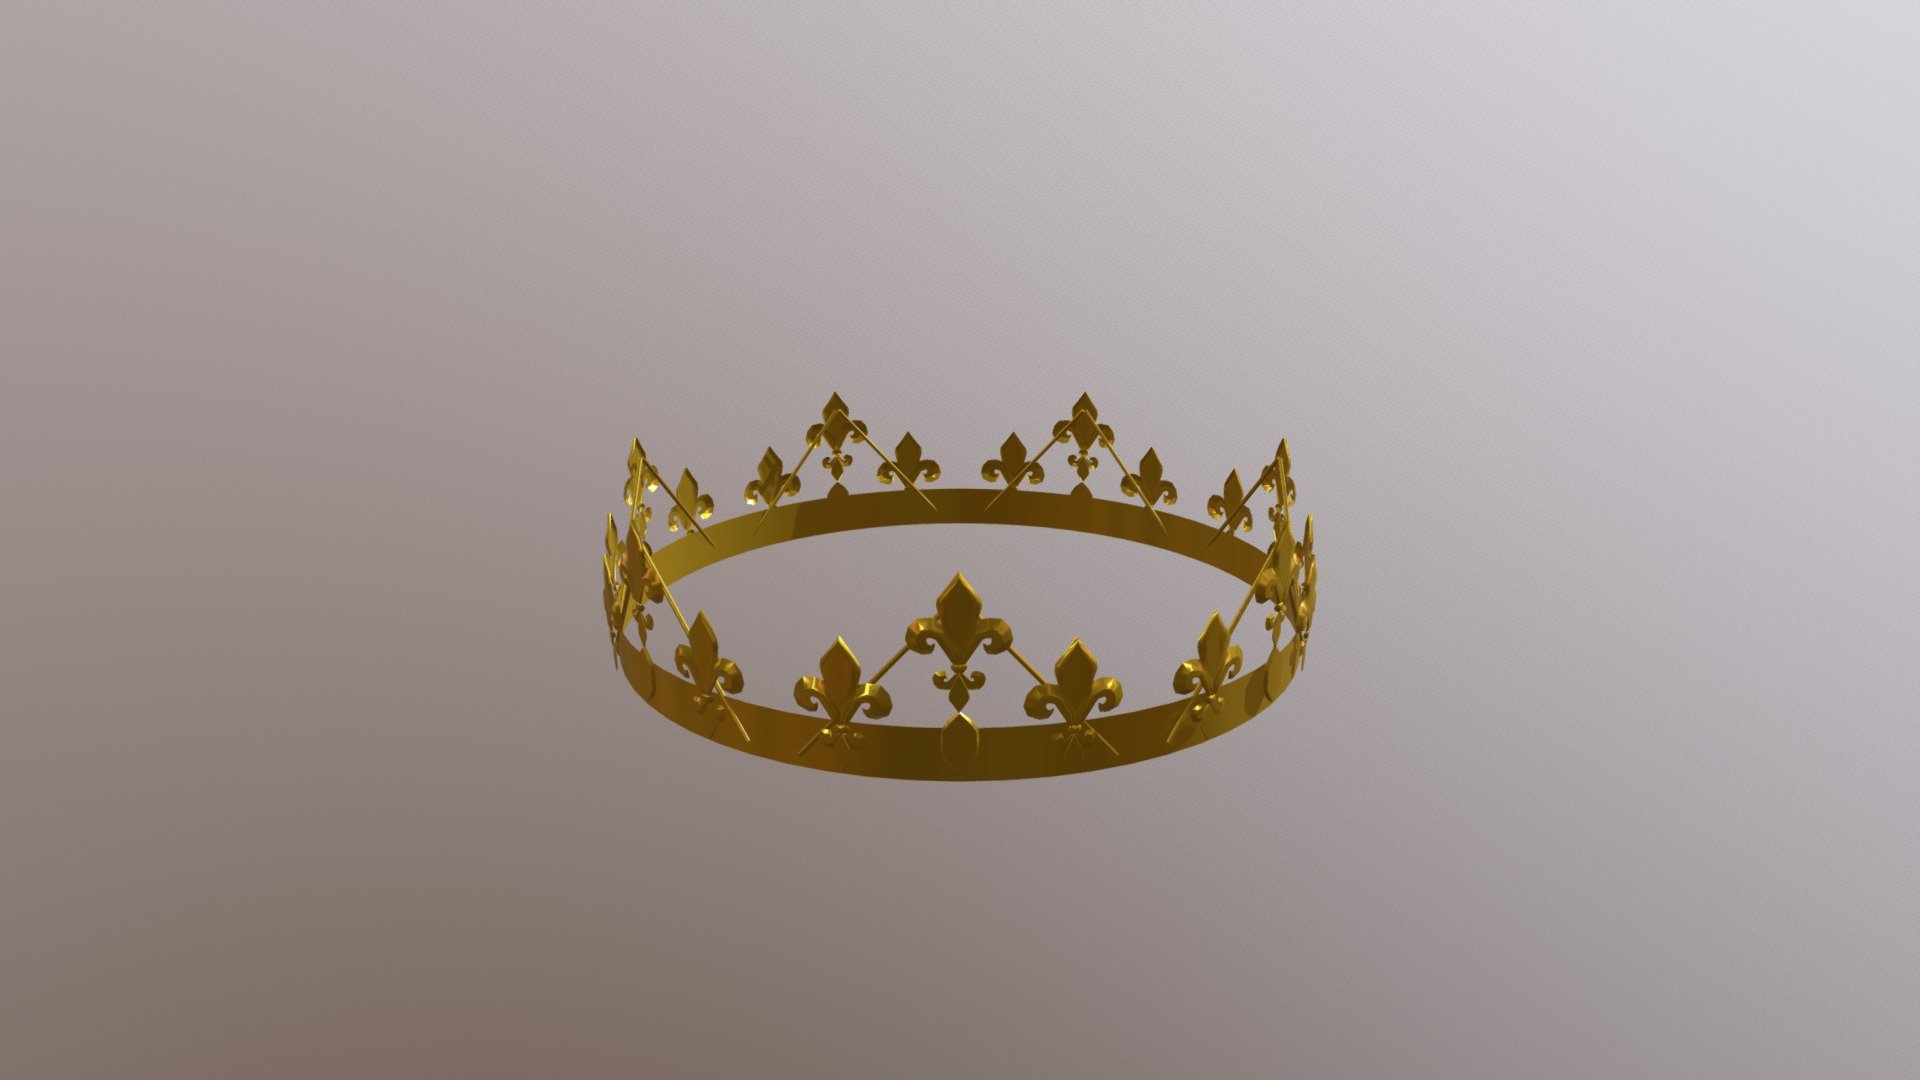 Crown made in autodesk maya. By Ulises Gamboa - Crown - 3D model by yaqueprimo 3d model